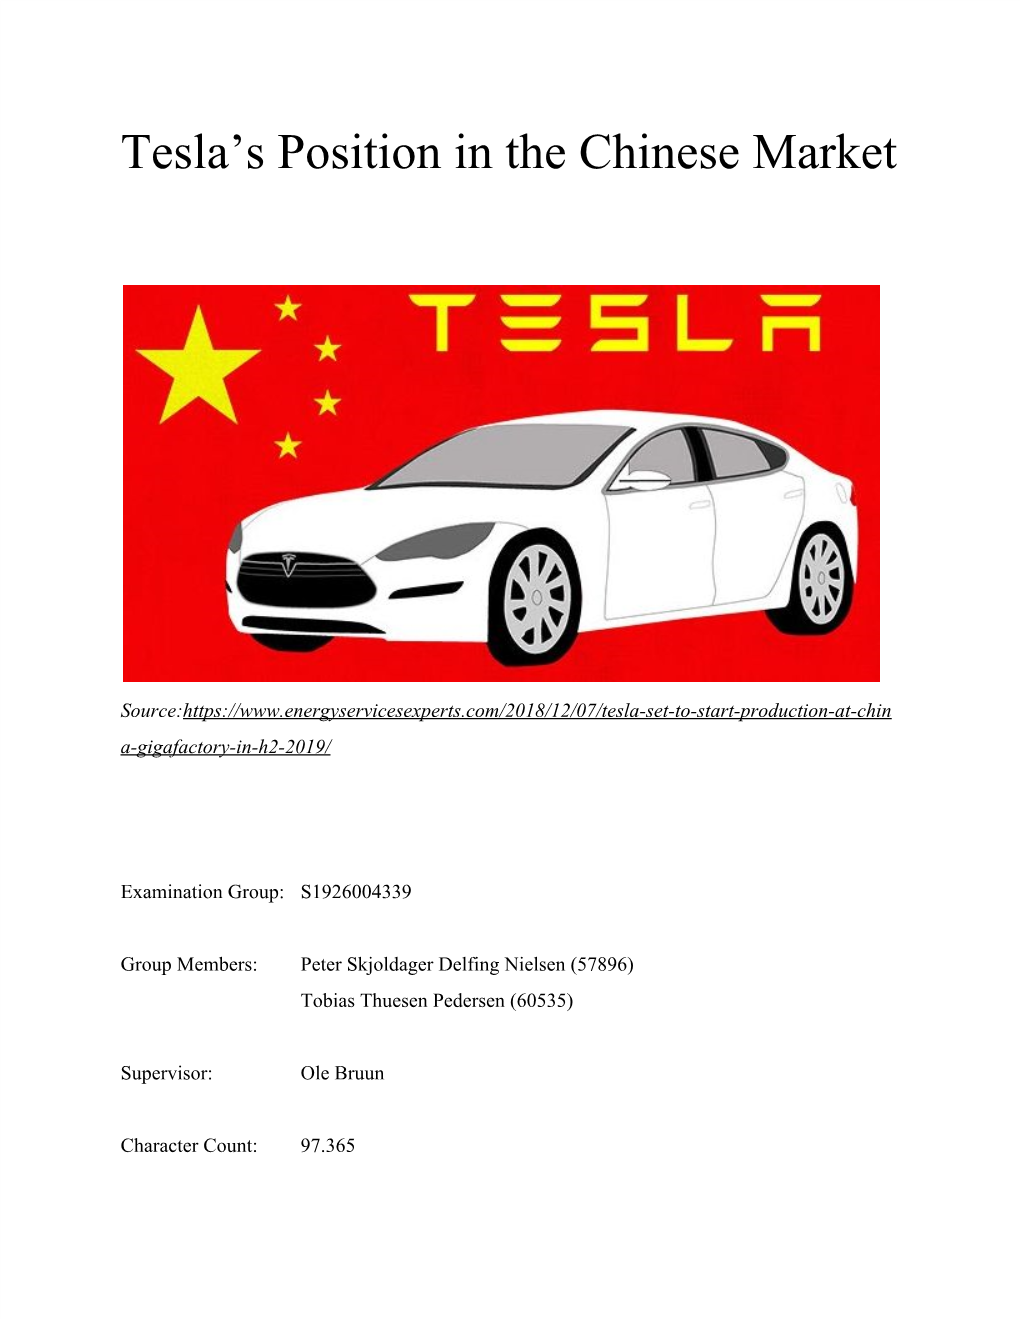 Tesla's Position in the Chinese Market